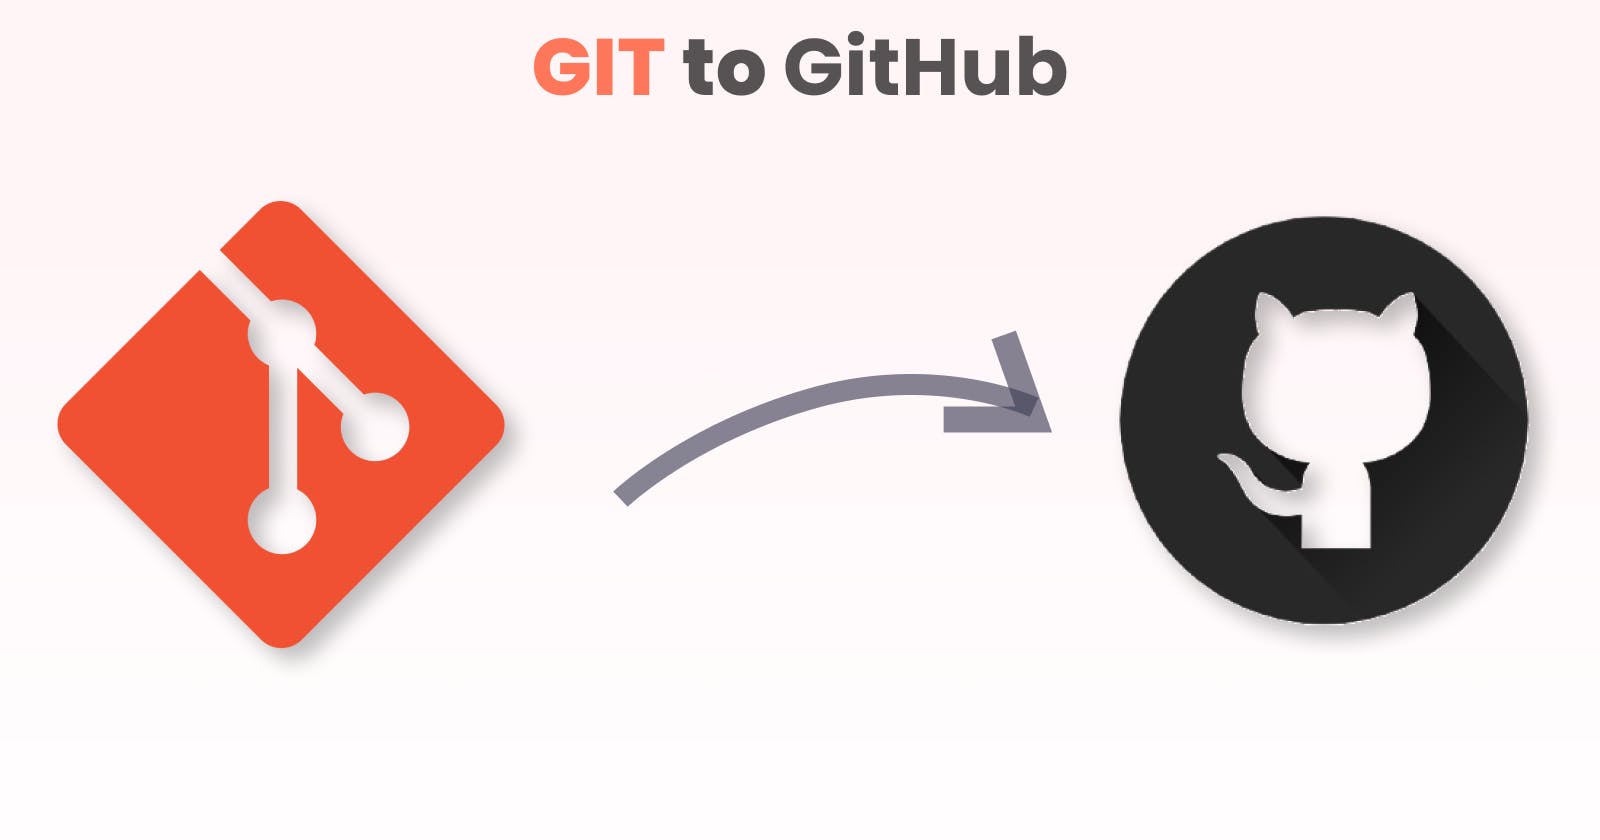 Push your Project to Github using GIT